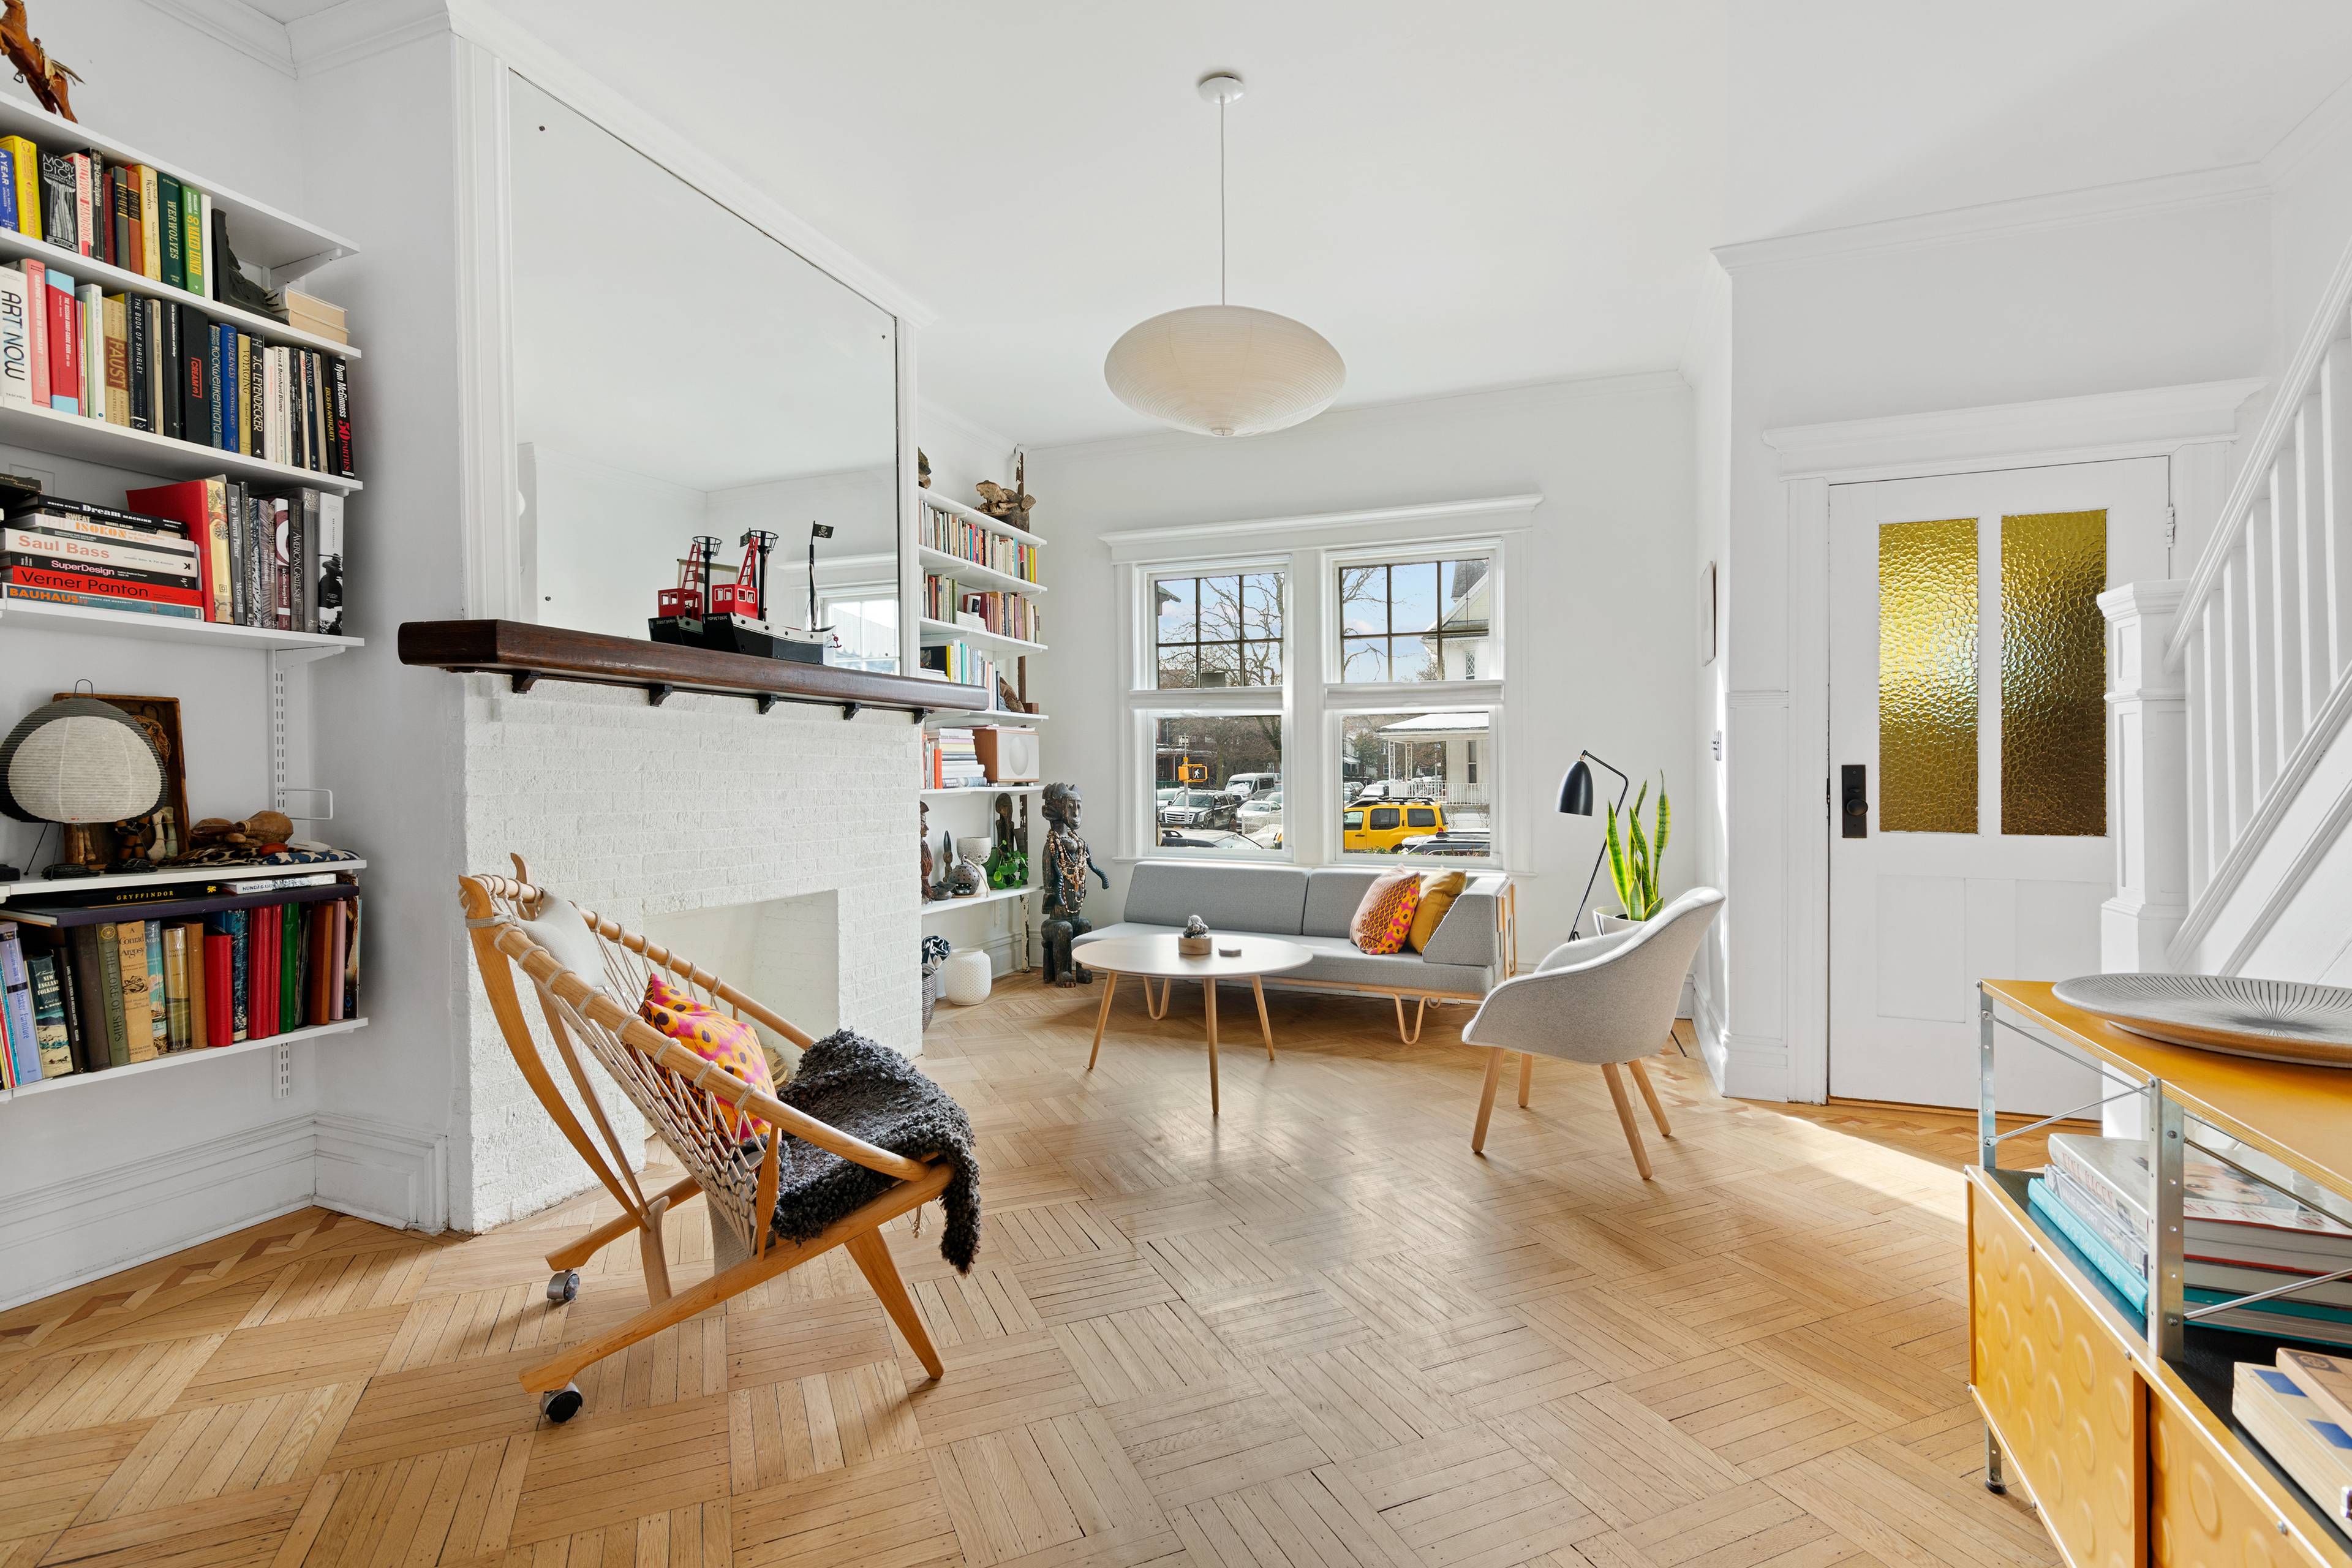 Welcome to 727 Ditmas Avenue, a sun drenched renovated townhouse in prime Kensington.